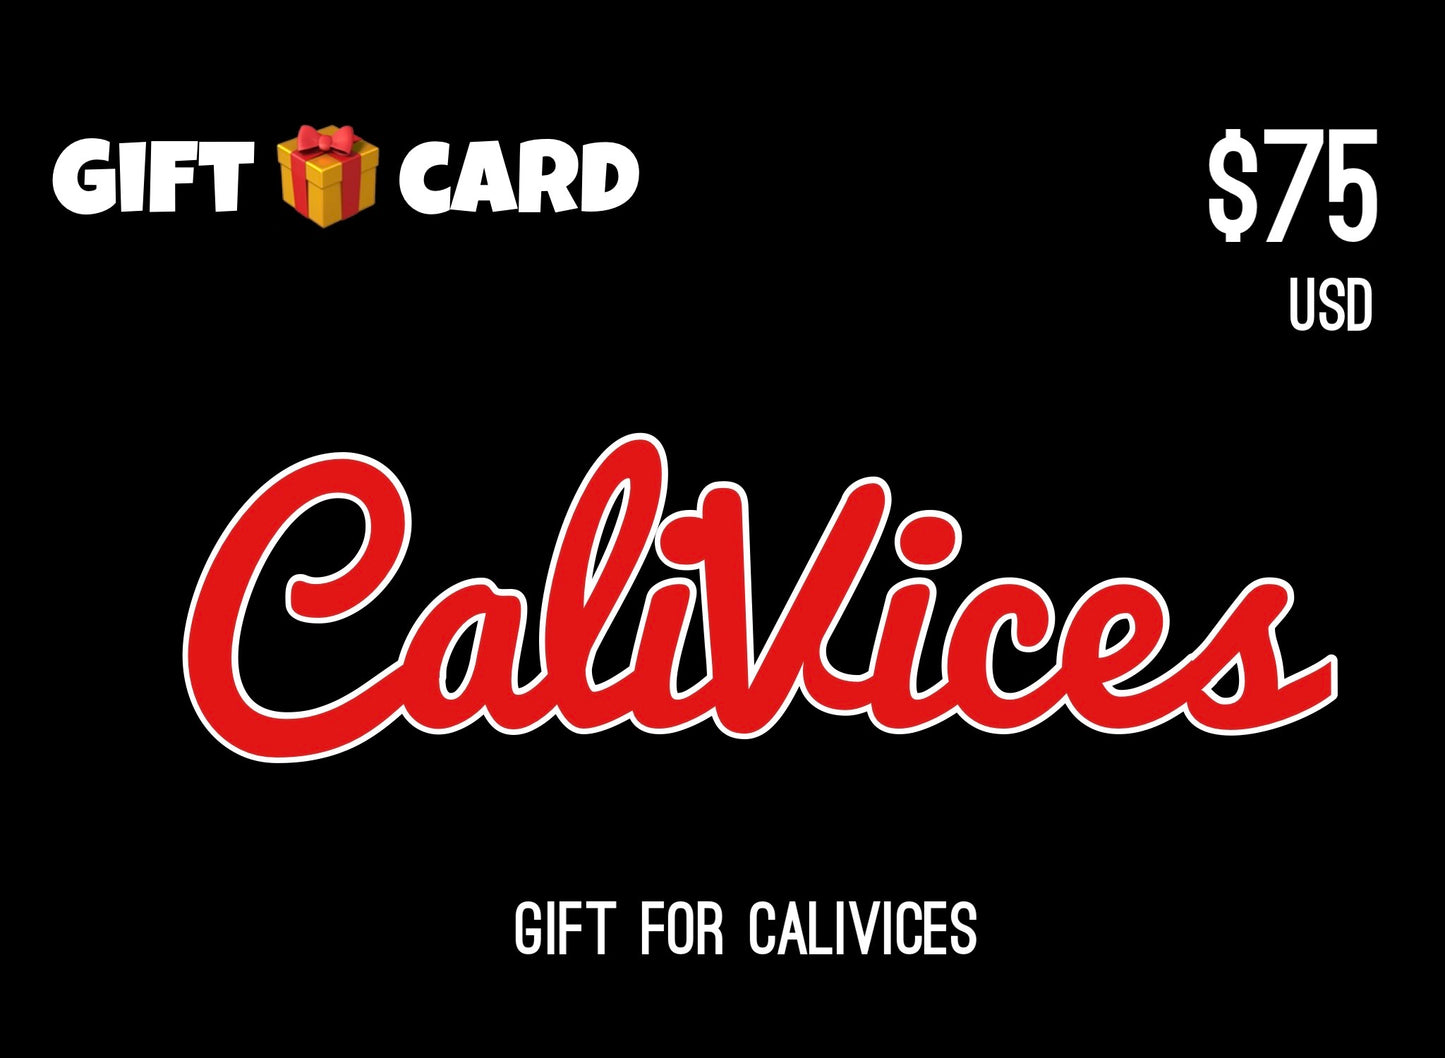 CALIFORNIA VICES GIFT CARDS